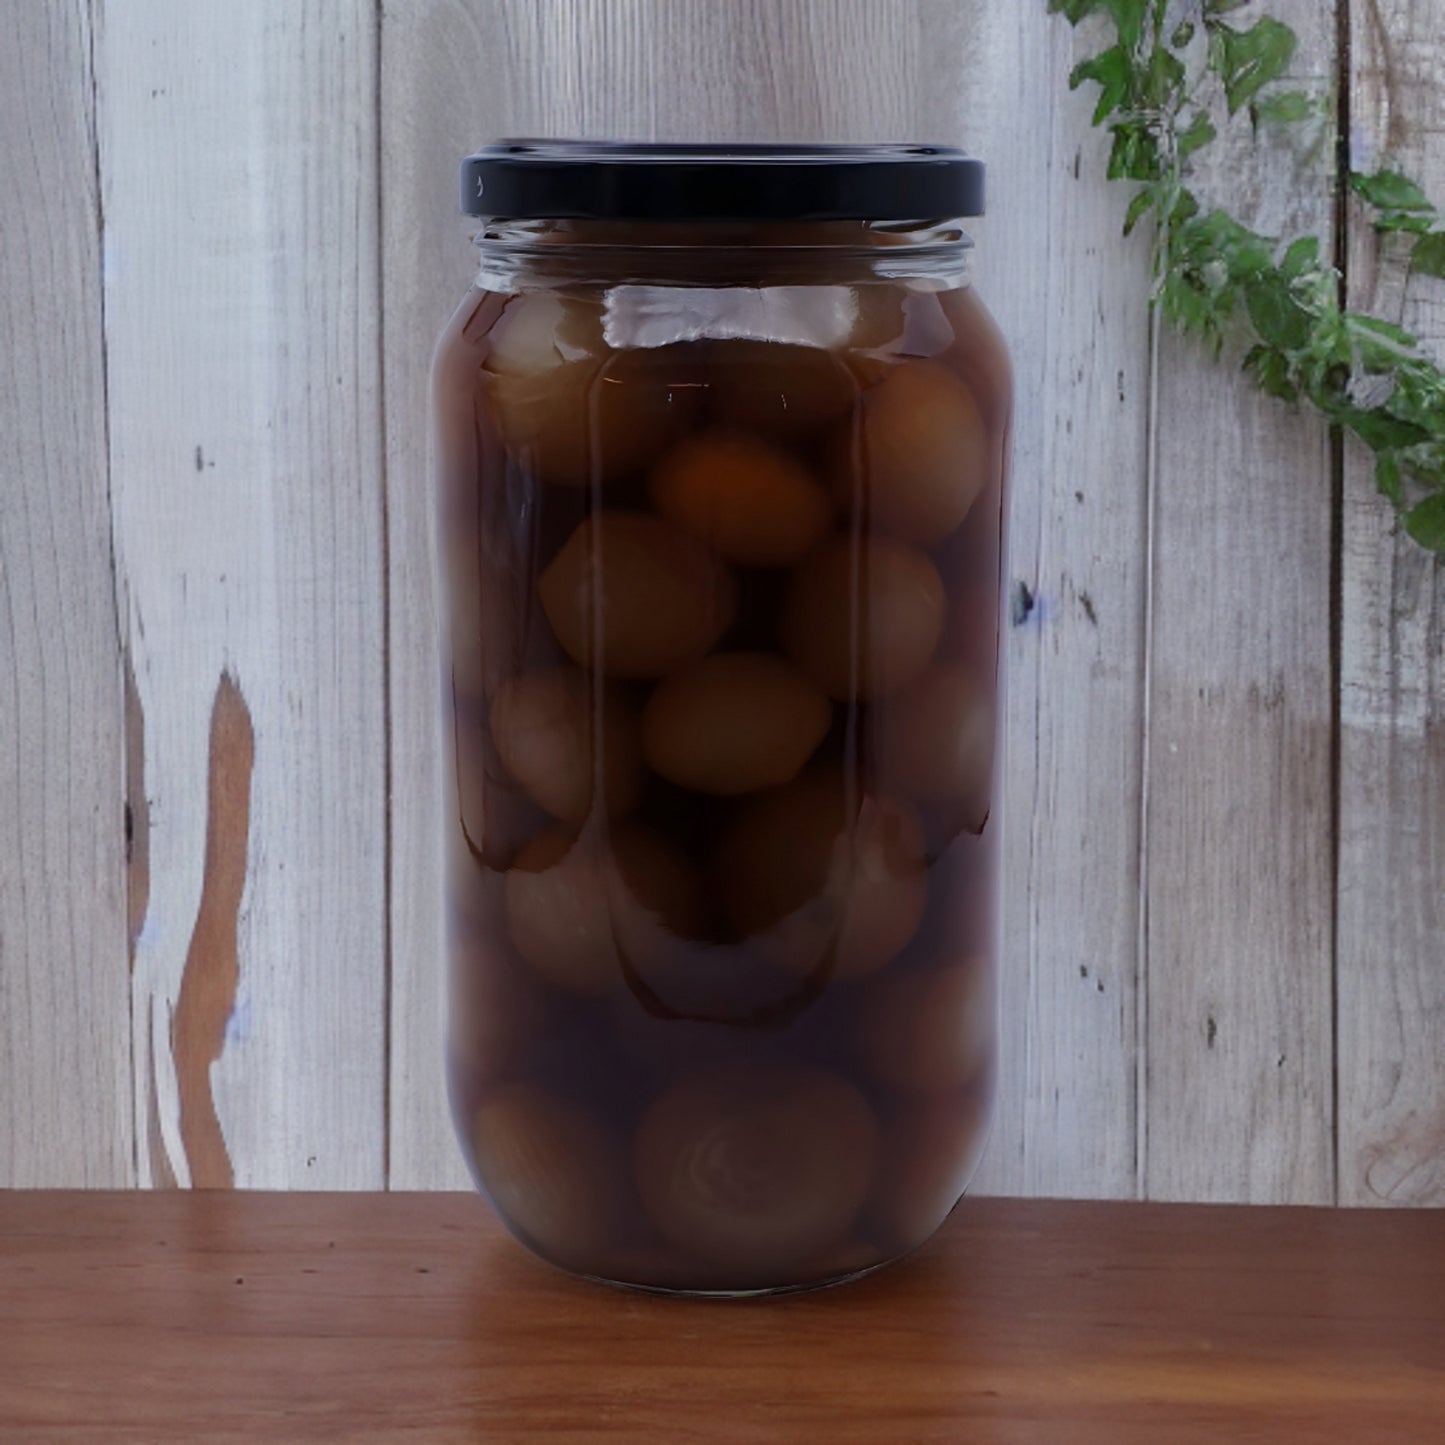 1L Round Glass Jar with an 82mm Black Twist cap, full of Pickled Onions